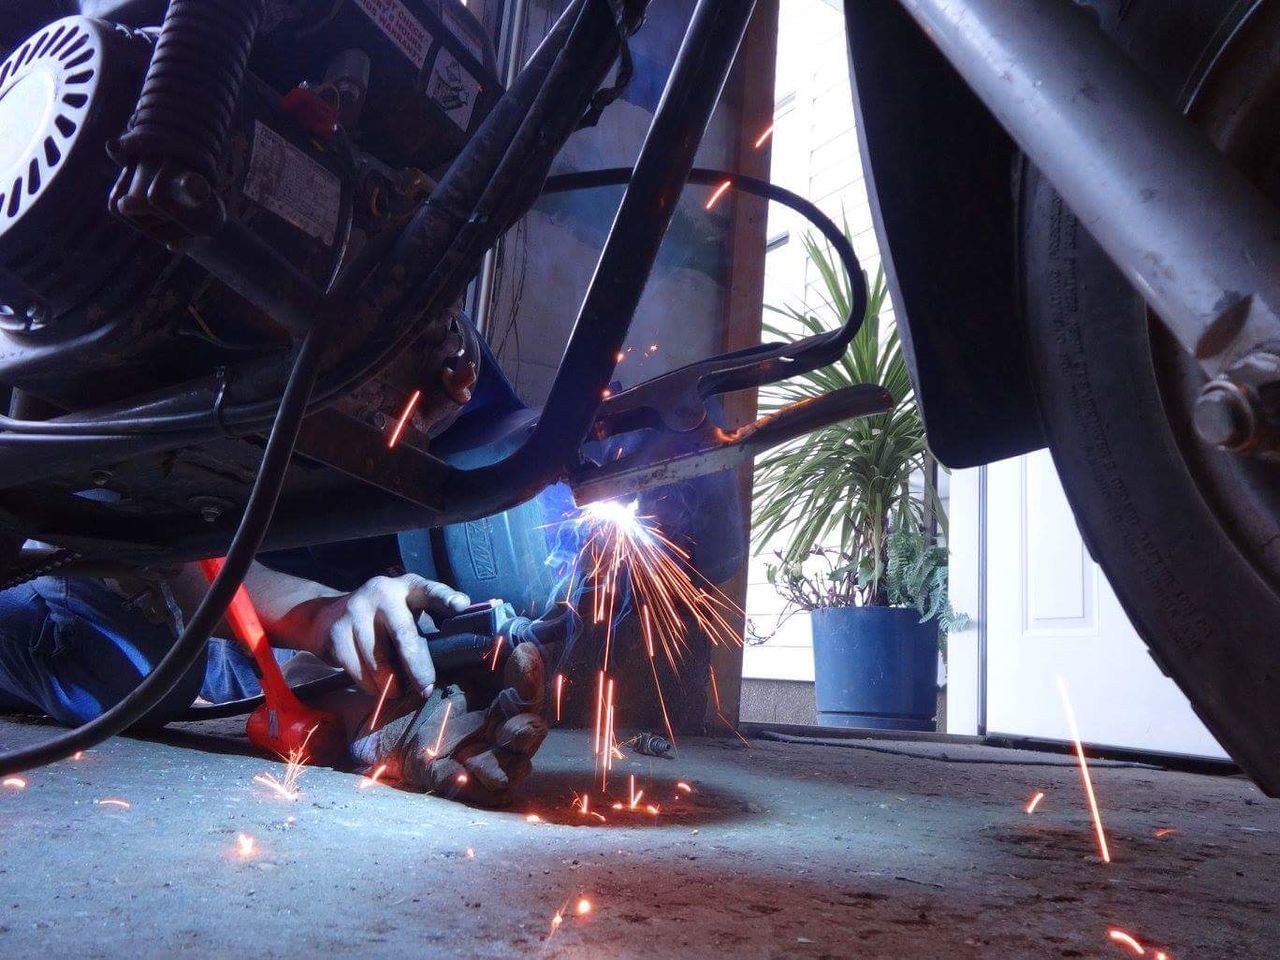 Low angle view of worker welding motorcycle